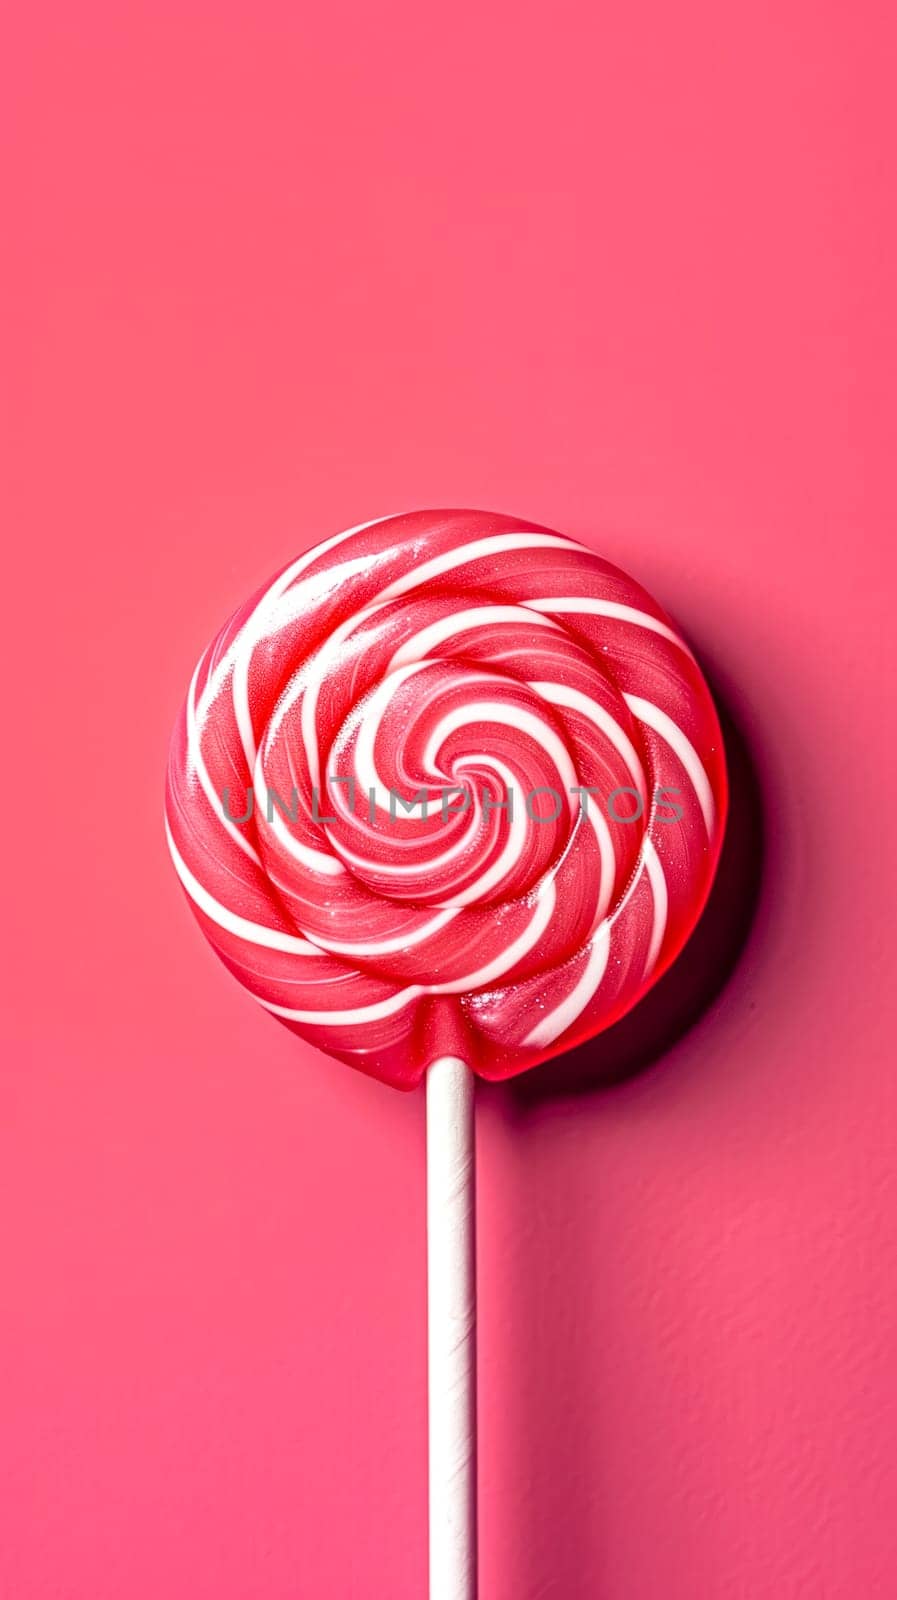 Red and white swirled lollipop on a bright pink background. by Edophoto